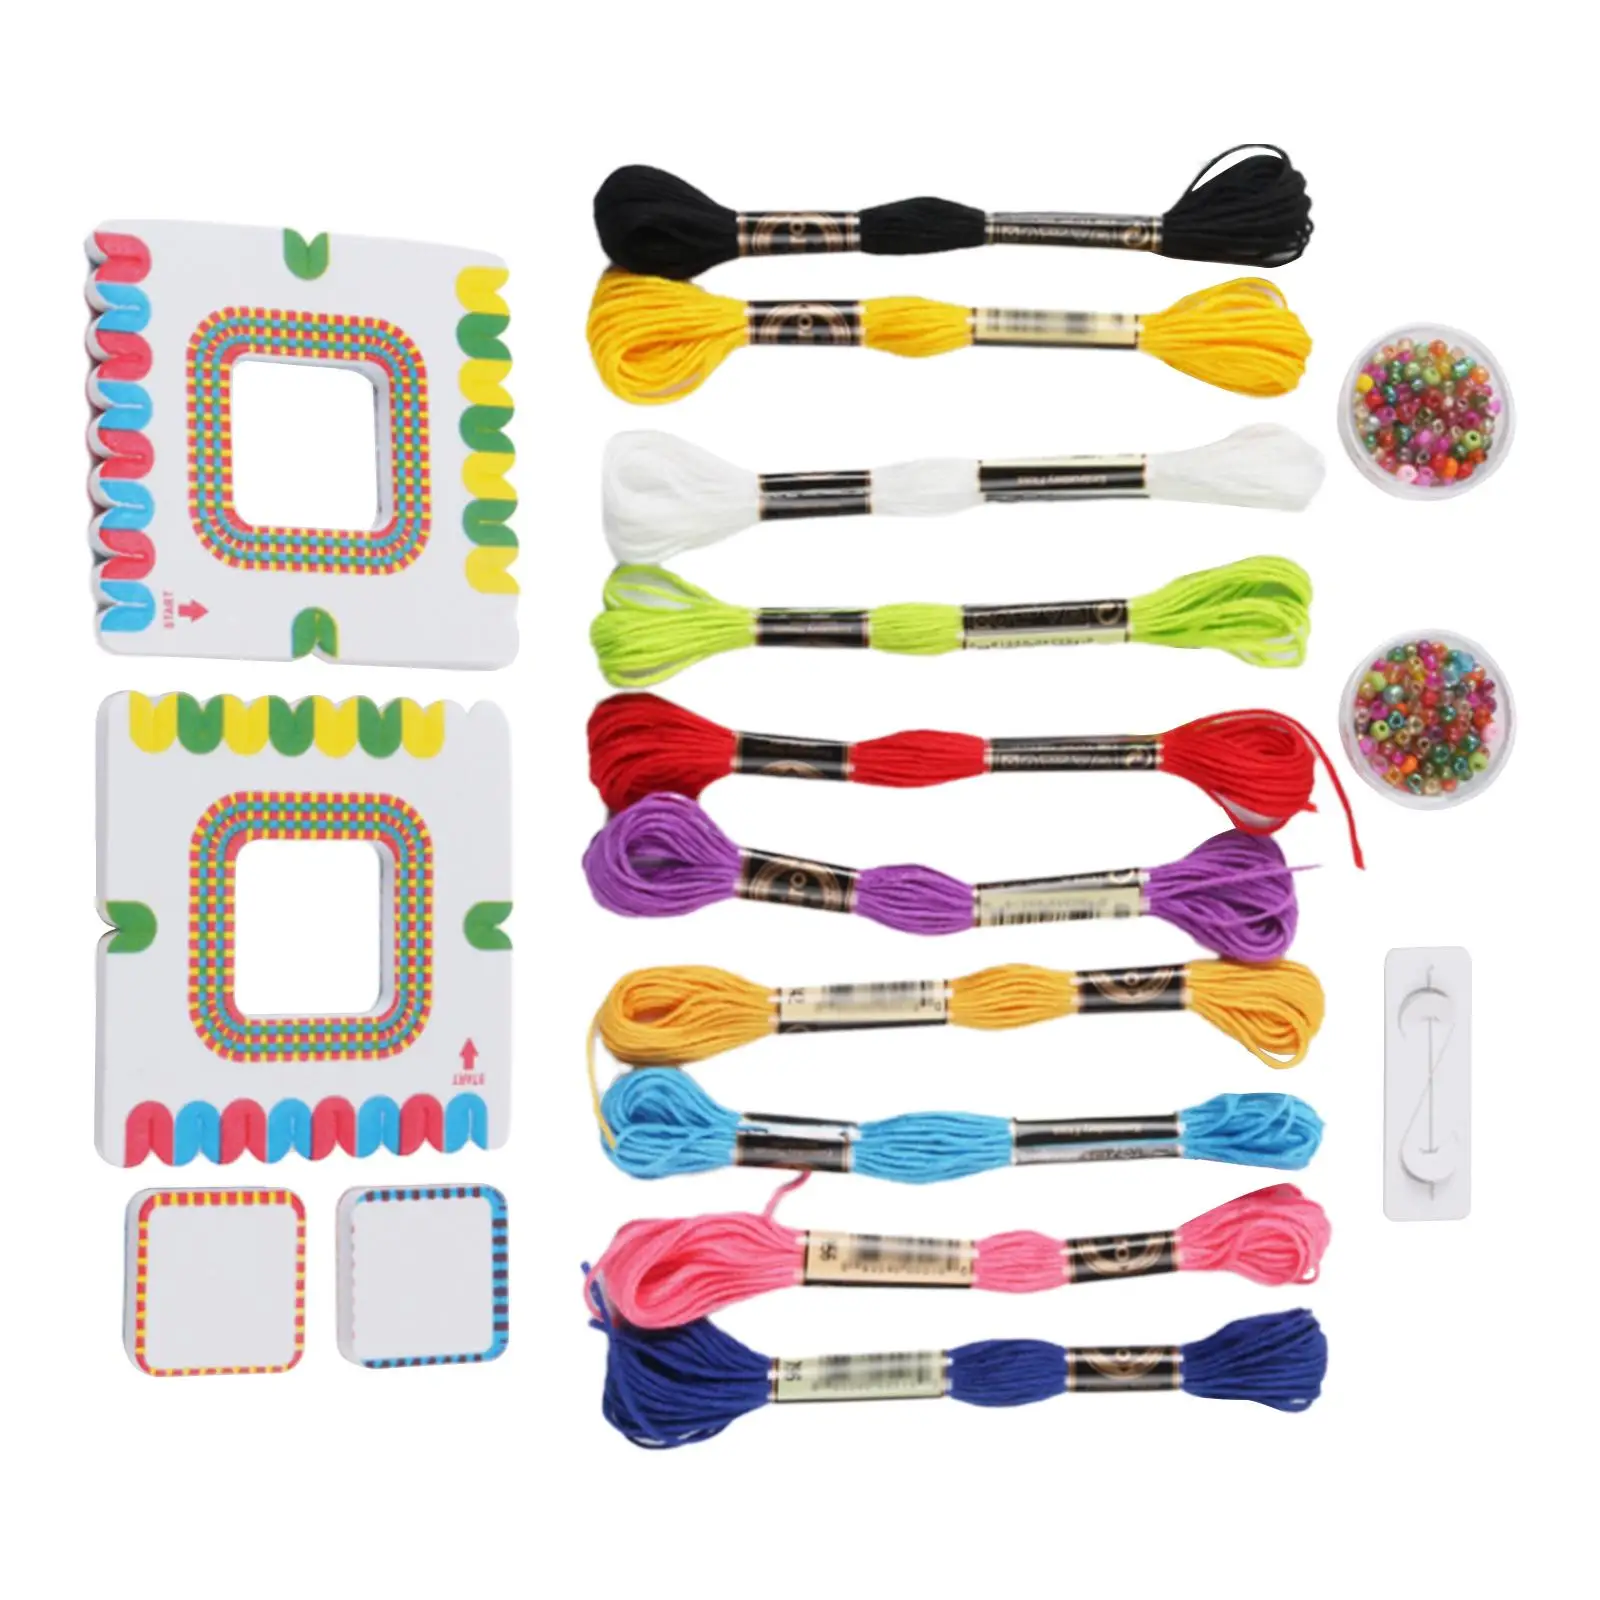 

DIY Bracelet Making Set 10 Colors Threads with Beads Kids Craft Set for Girl Ages 6 7 8 9 10 11 12 Year Old Kids Women Teens